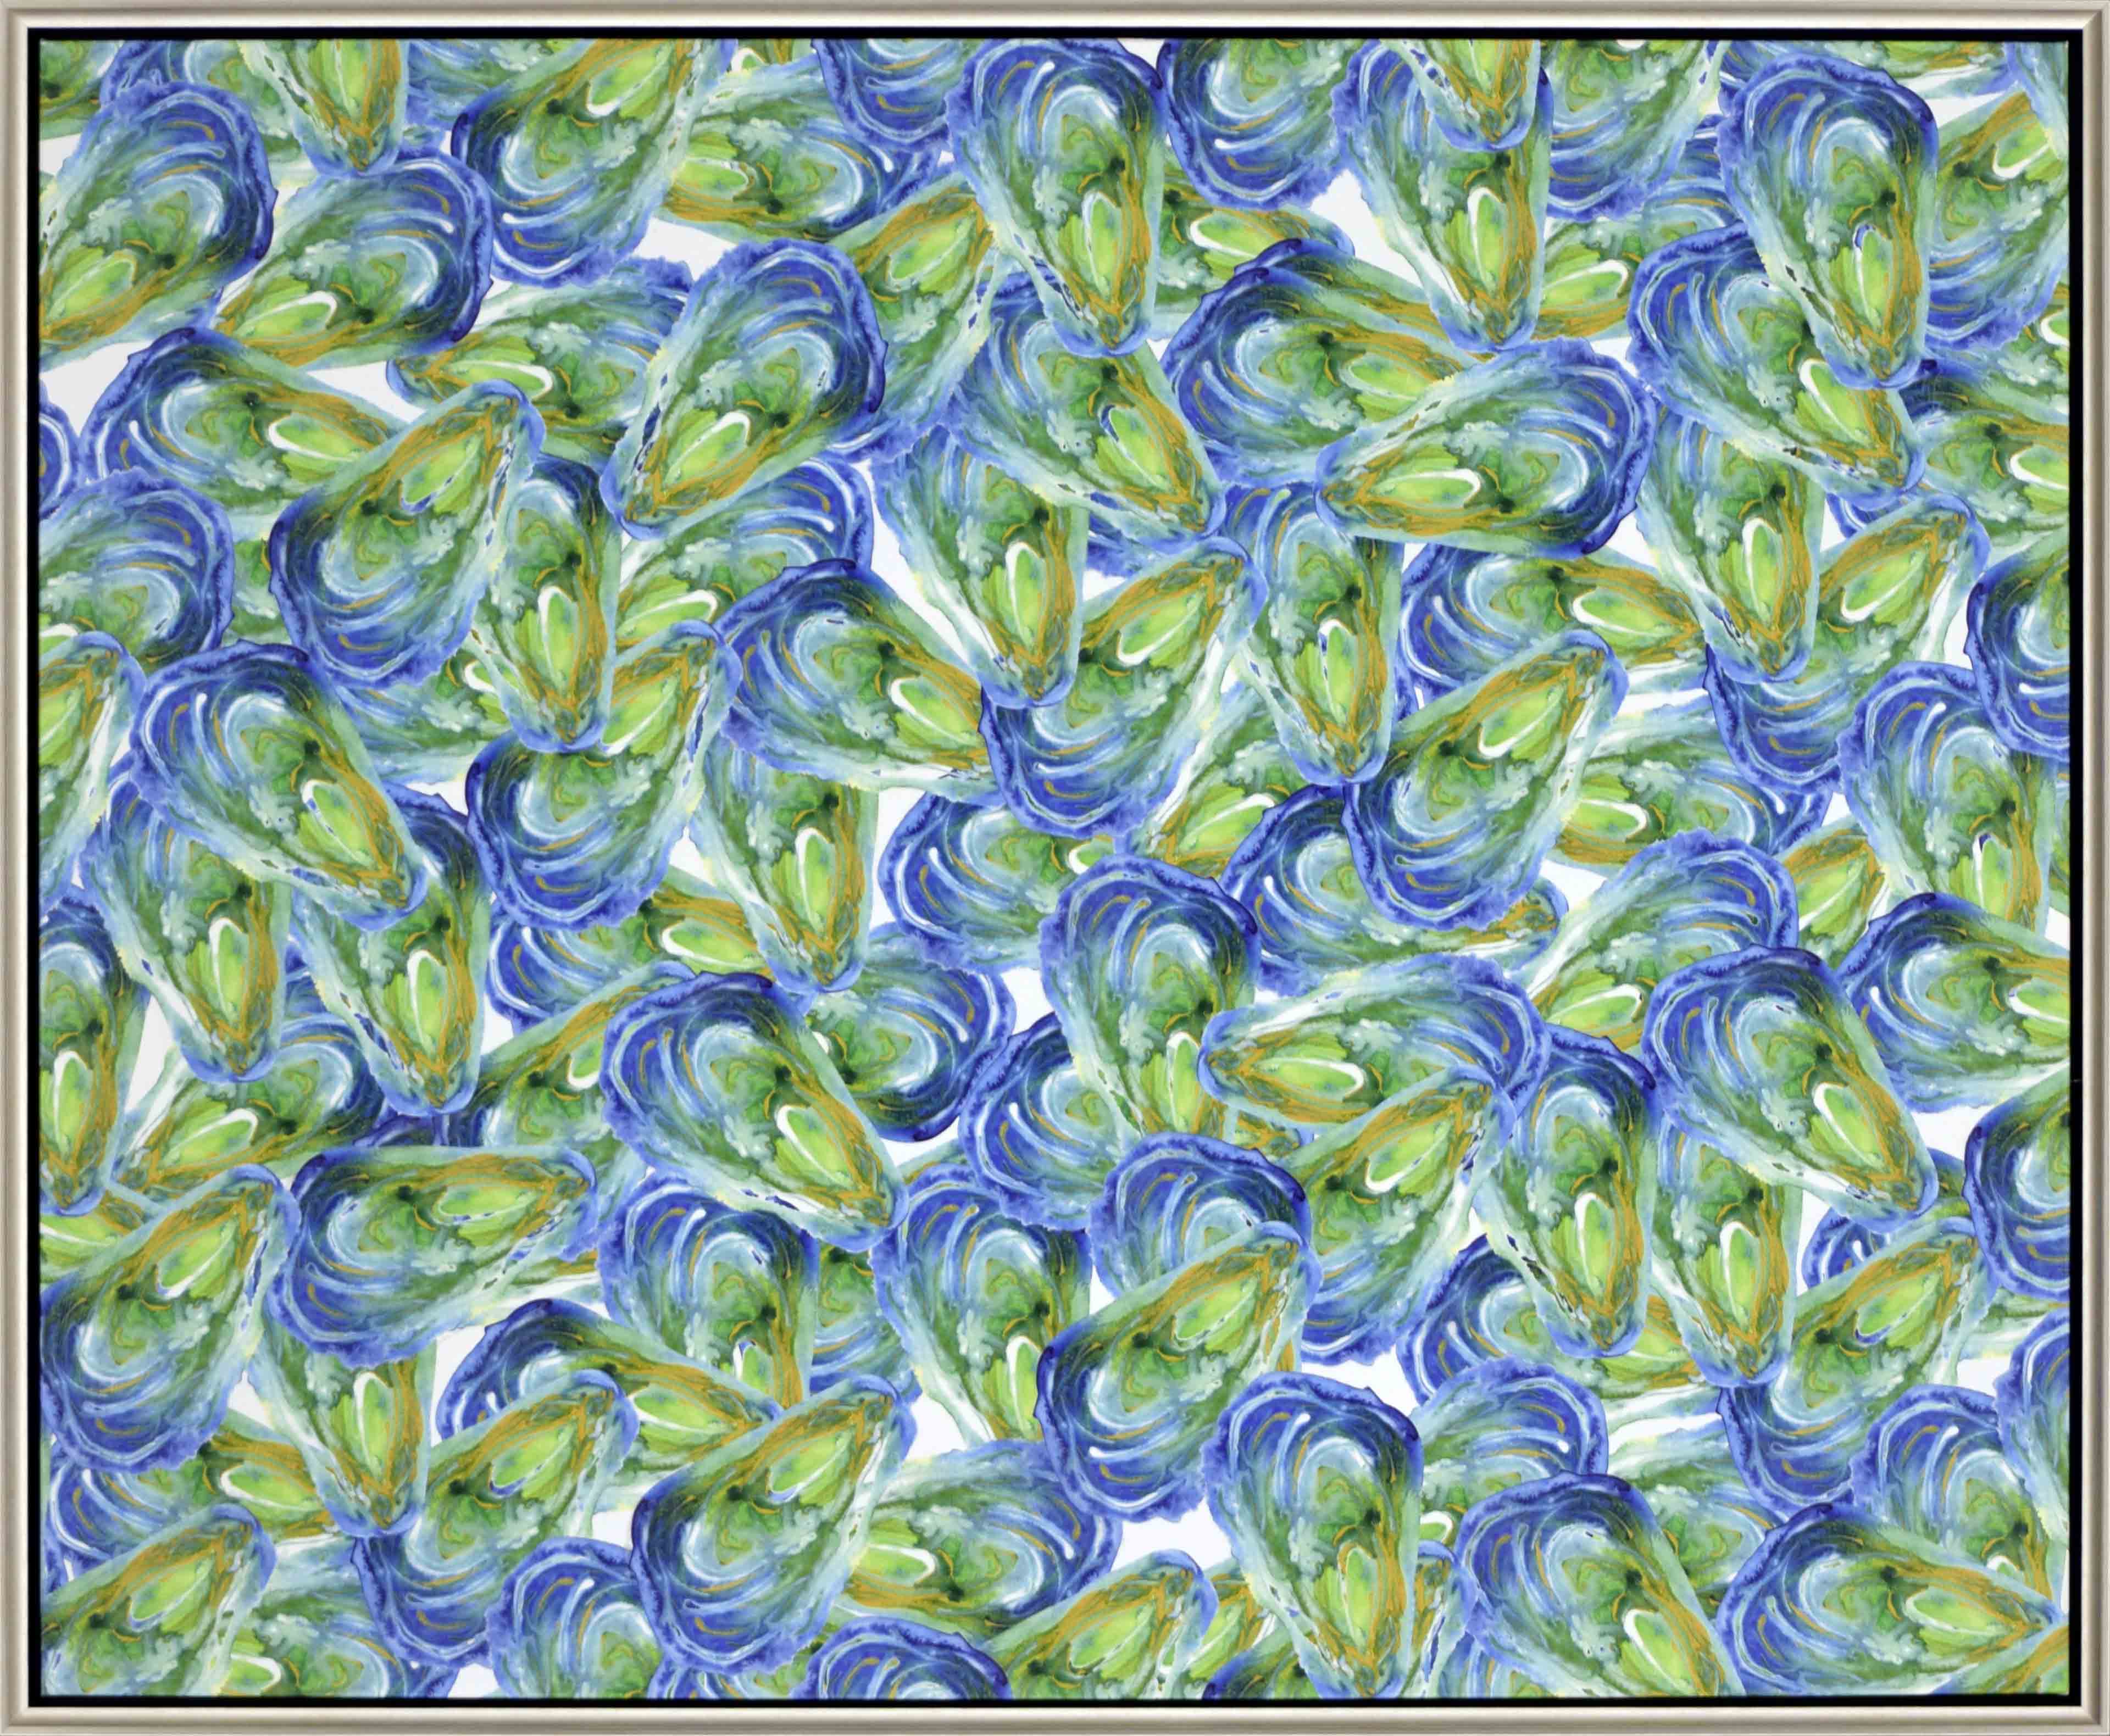 Blue Oyster Reef painting created by Joni Vanderslice for the J. Banks Collection for Paragon Art